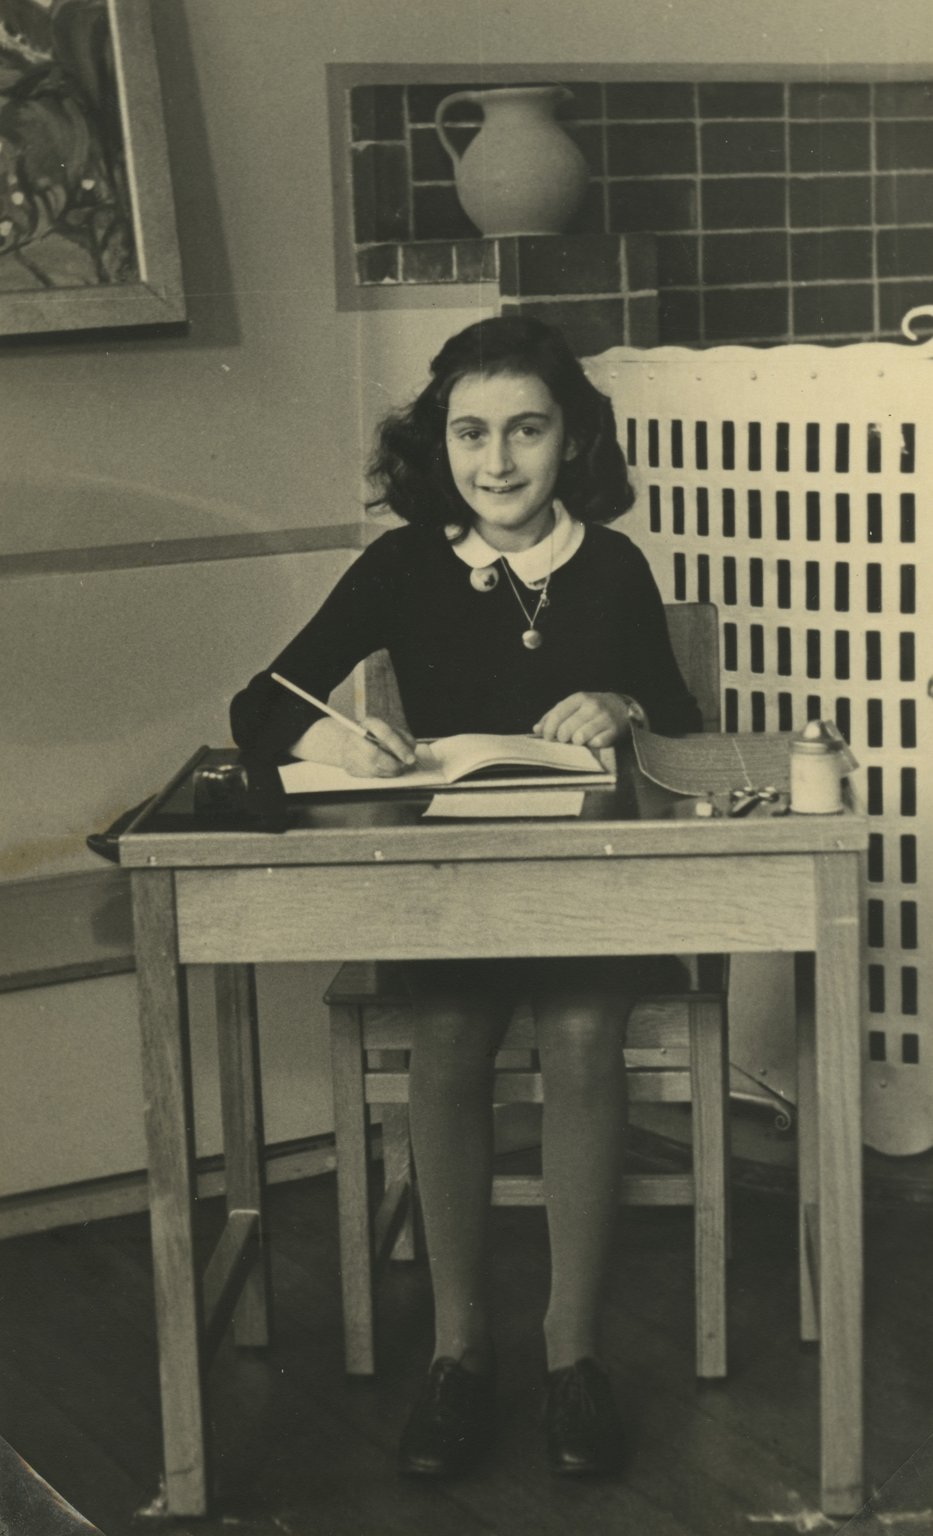 Anne in her final year of primary school, 1940.